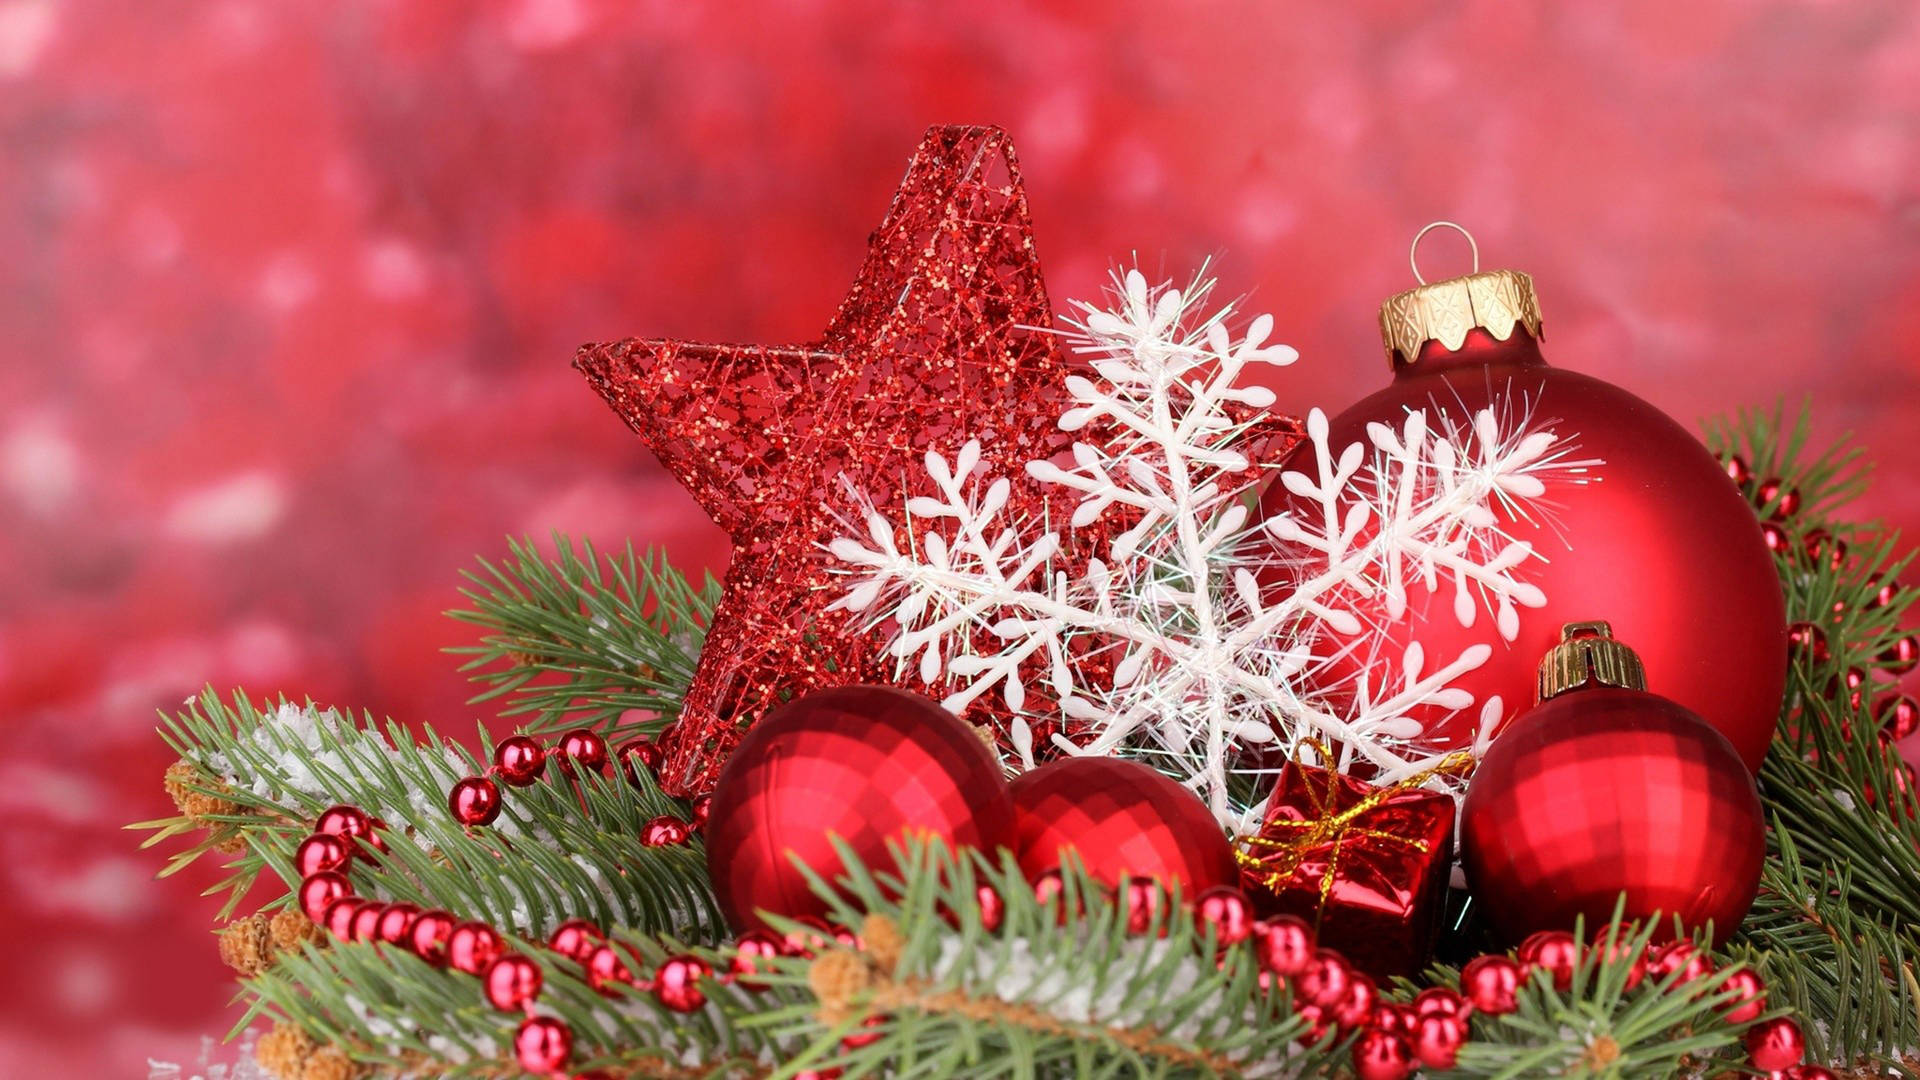 Caption: Festive Christmas Desktop With Red Ornaments Background